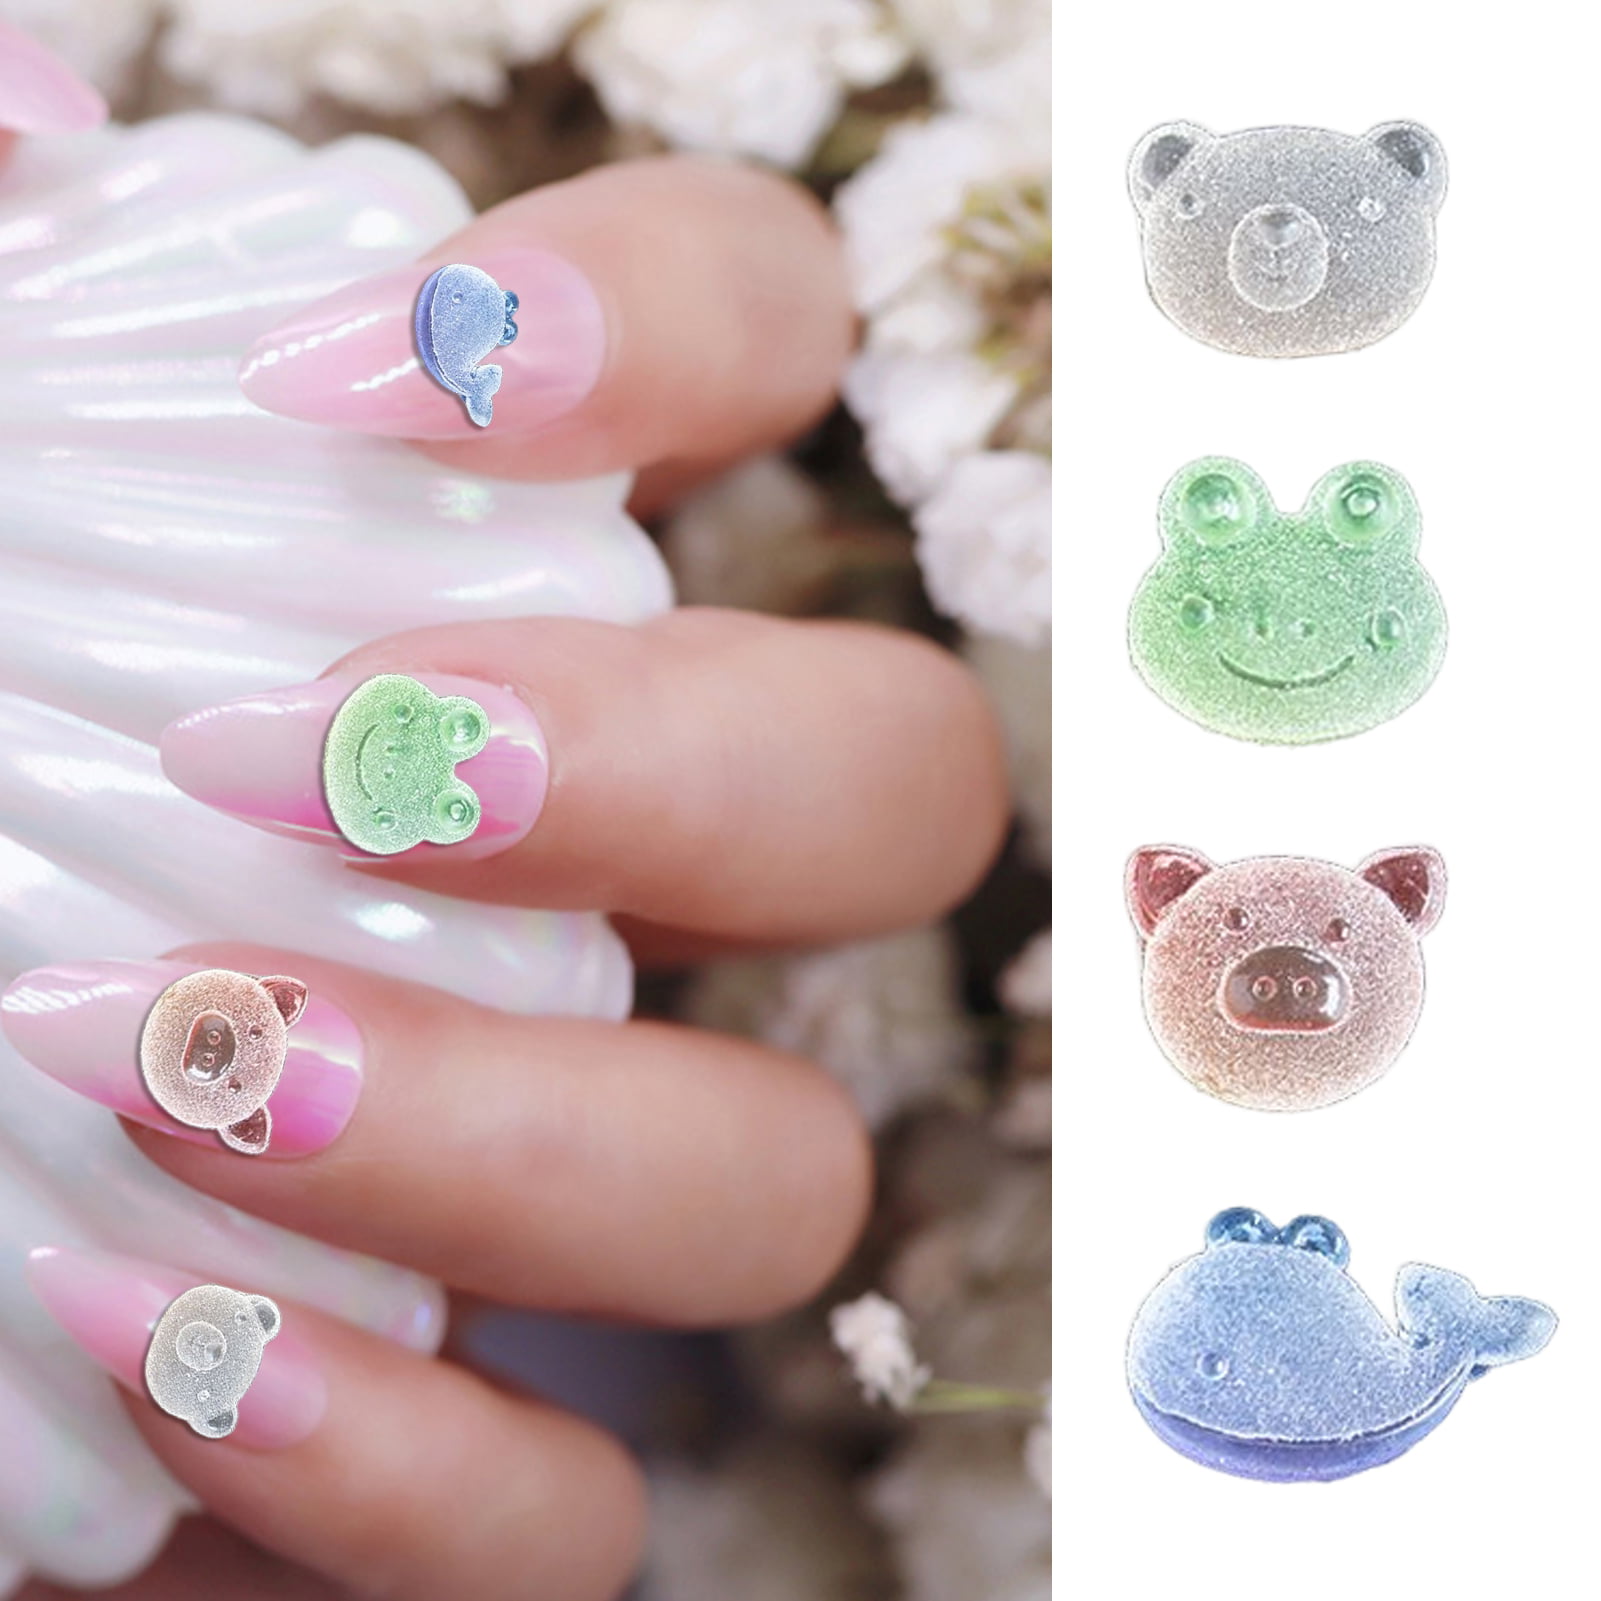 Amazon.com : 10 Frogs Nail Art Decals : Beauty & Personal Care